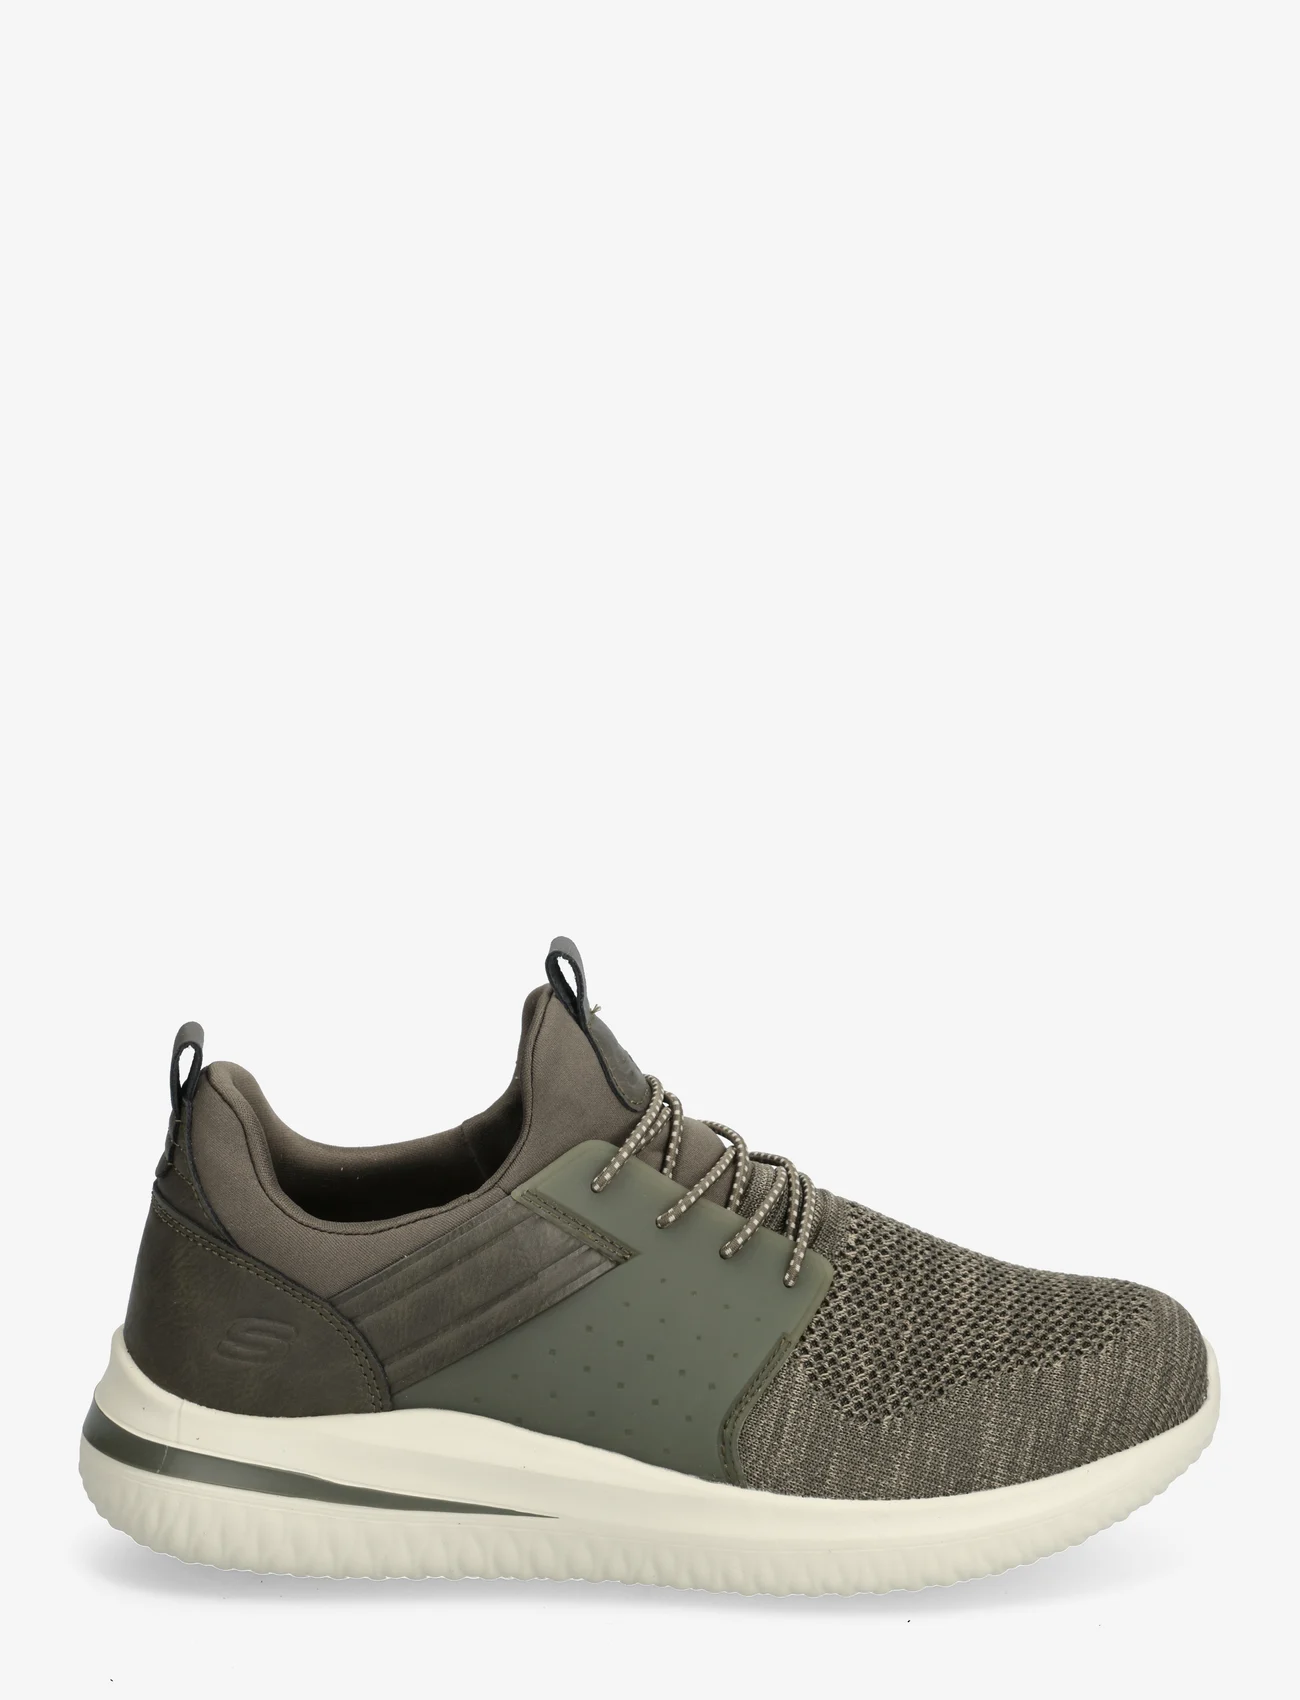 Skechers - Mens Delson 3.0 - Cicada - low tops - olv olive - 1